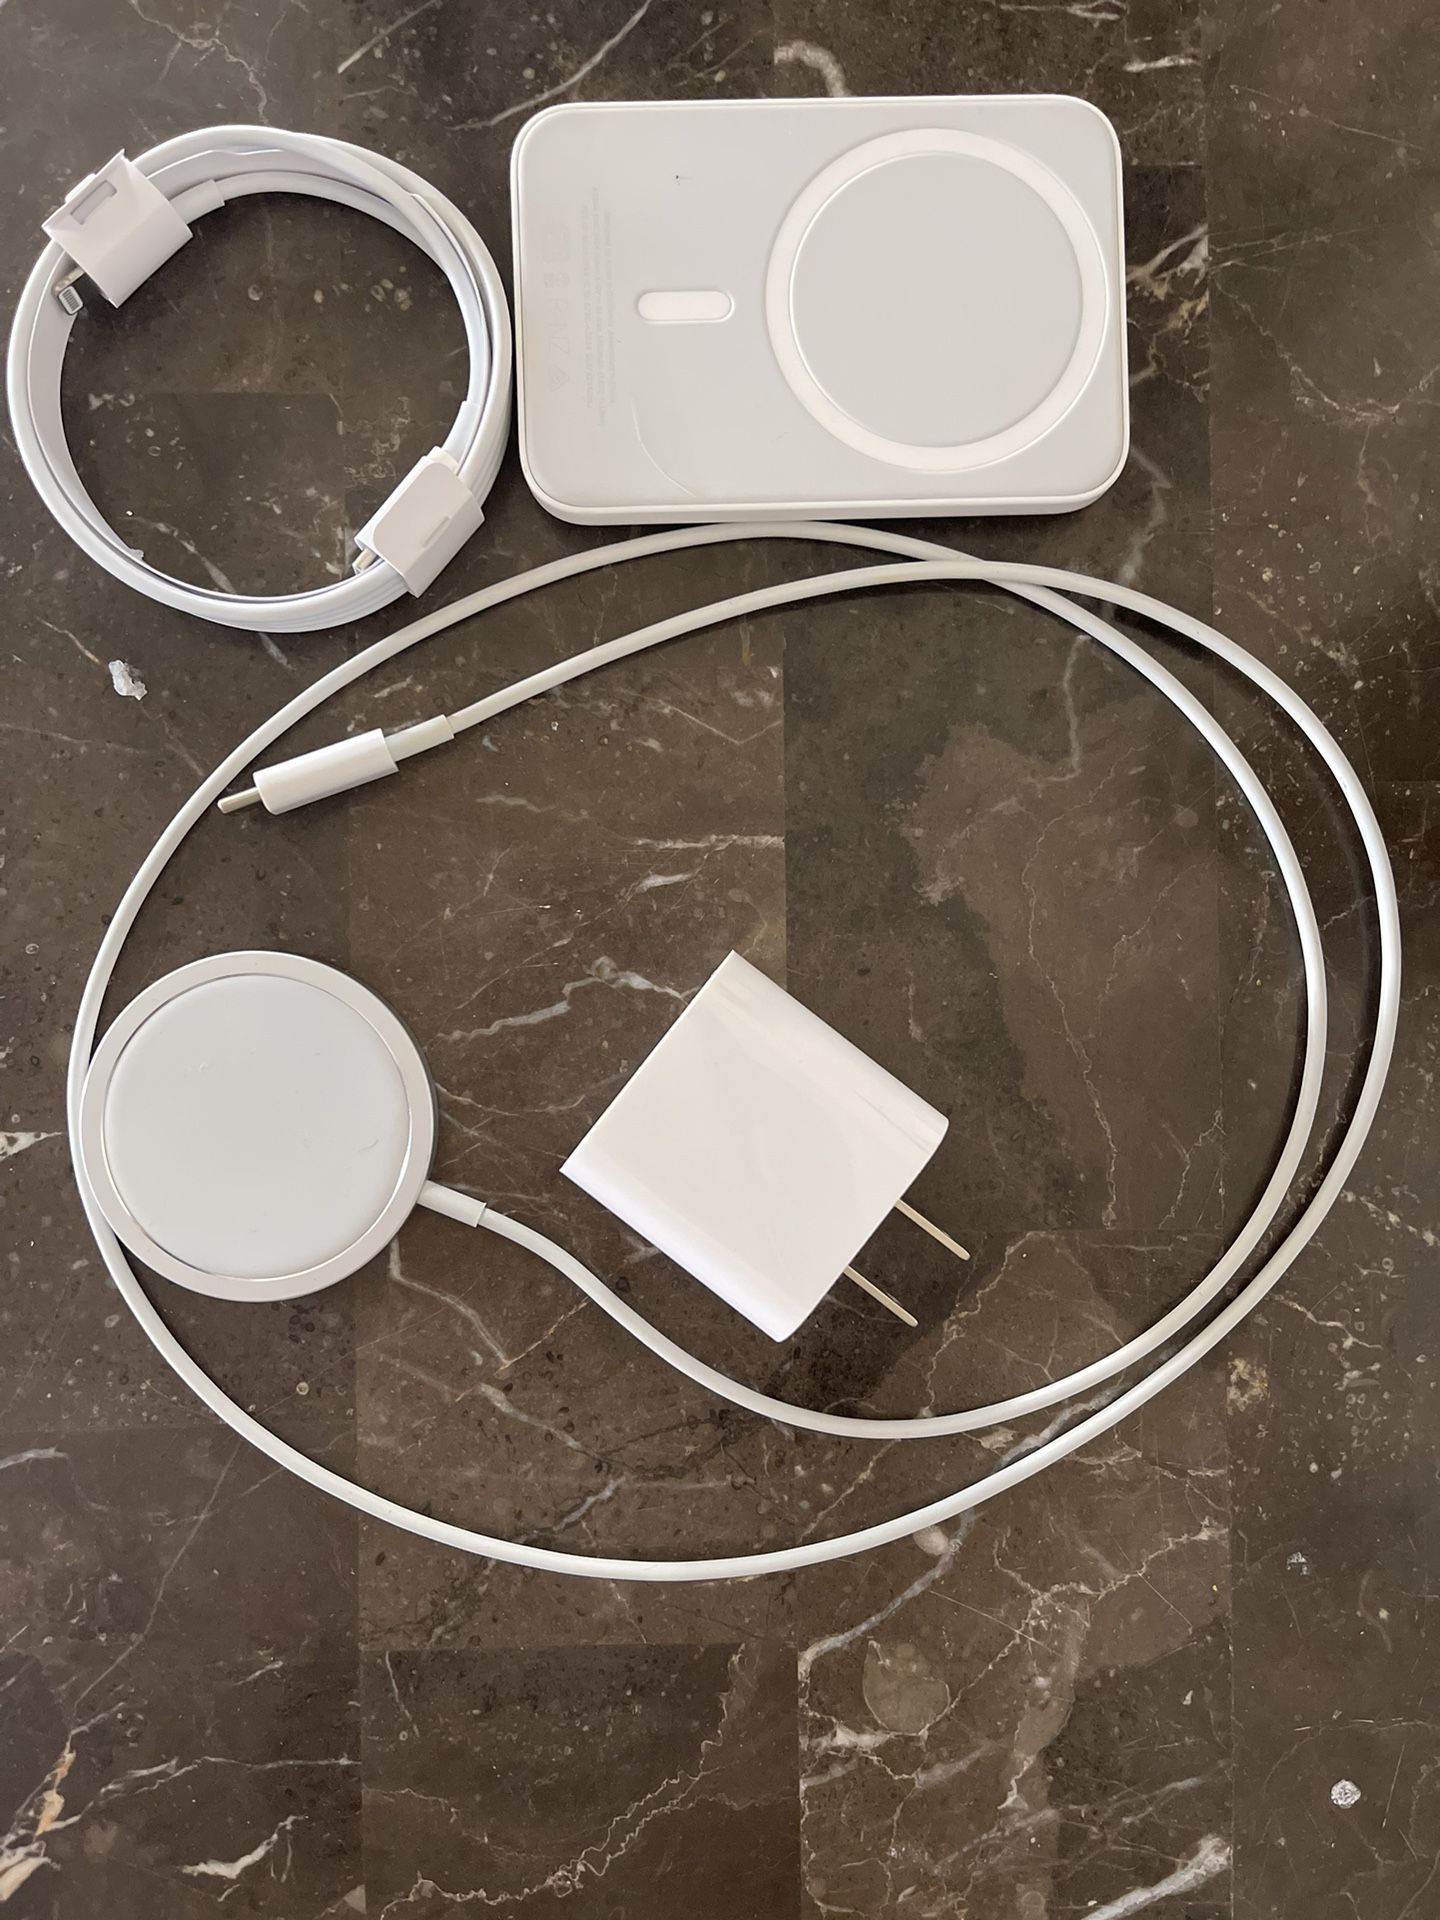 Apple Portable Charger And Apple Charging Pad , Lightning Cable And Box